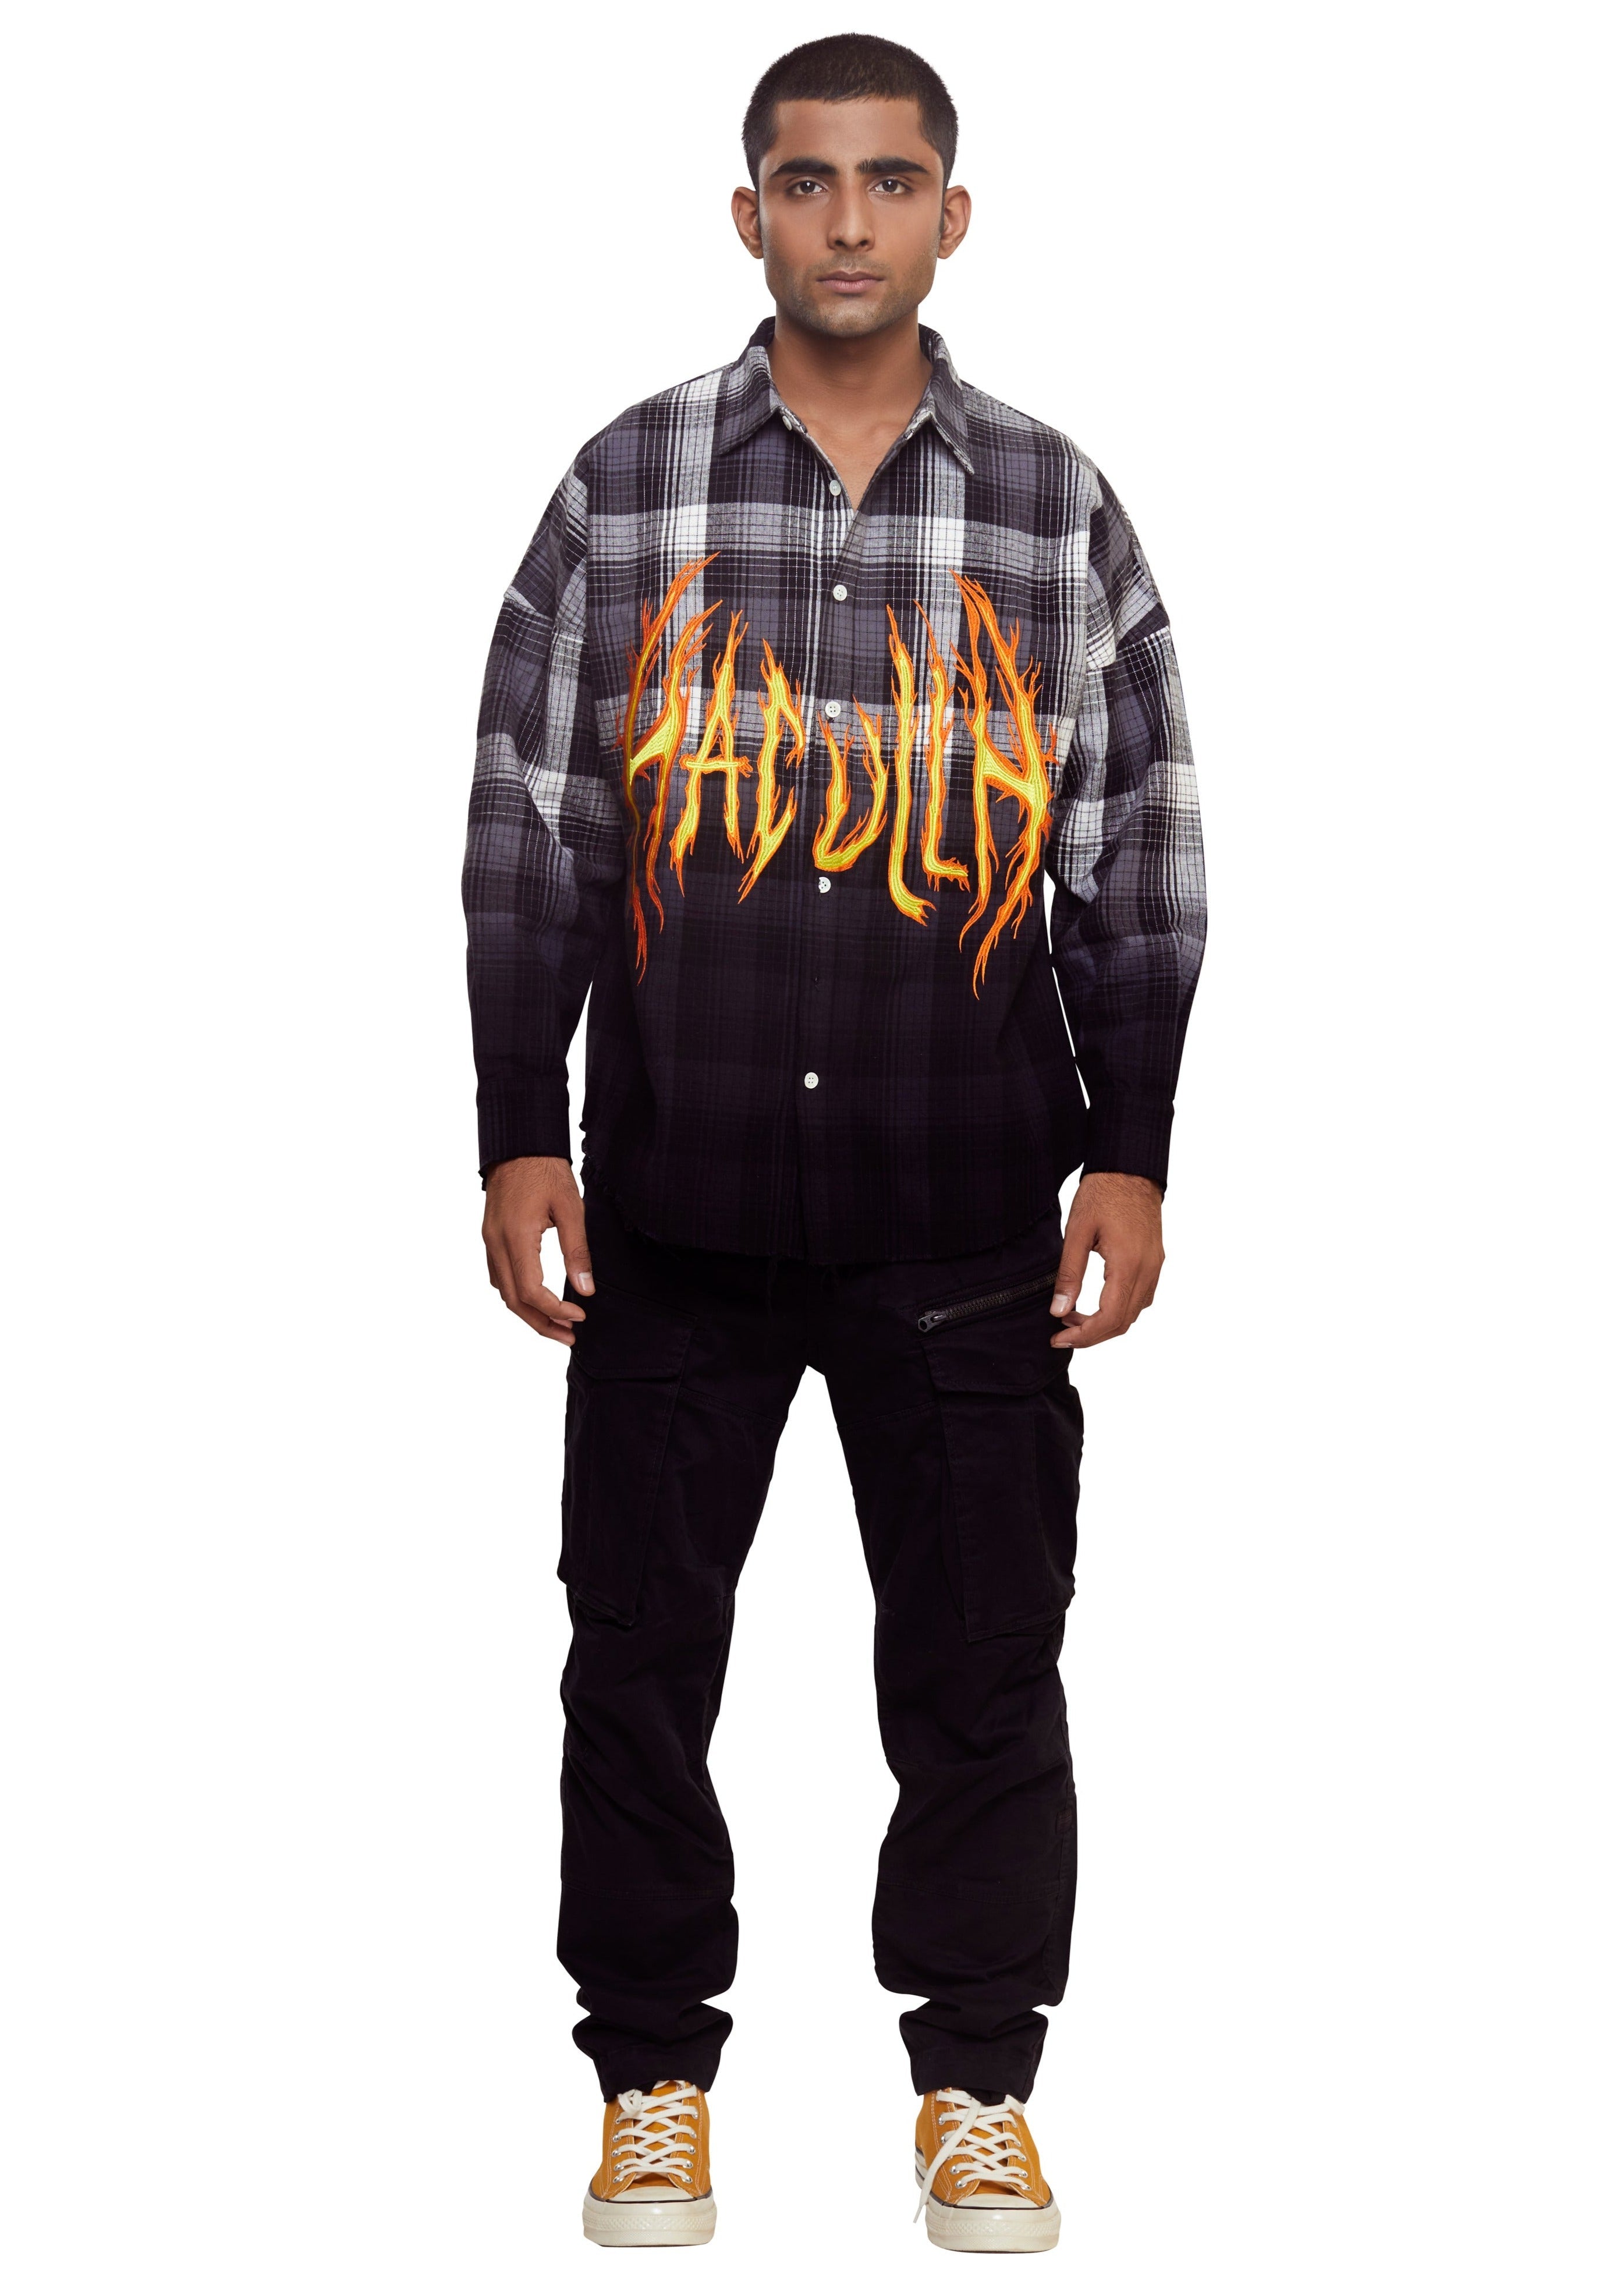 Black full sleeves ombre print checkered shirt with a fire logo from the brand Haculla